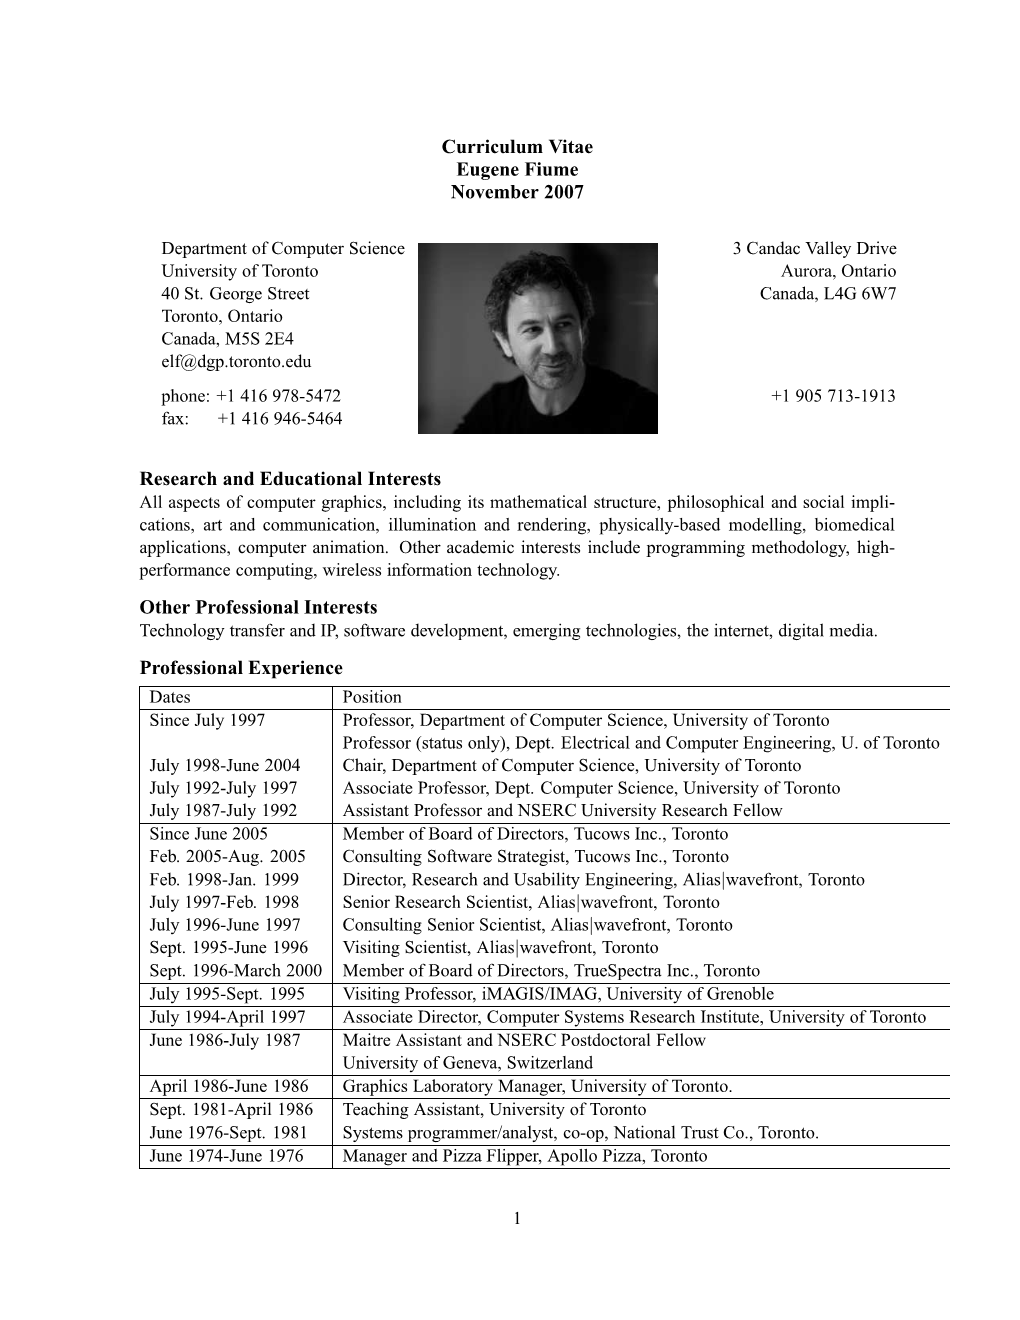 Curriculum Vitae Eugene Fiume November 2007 Research And